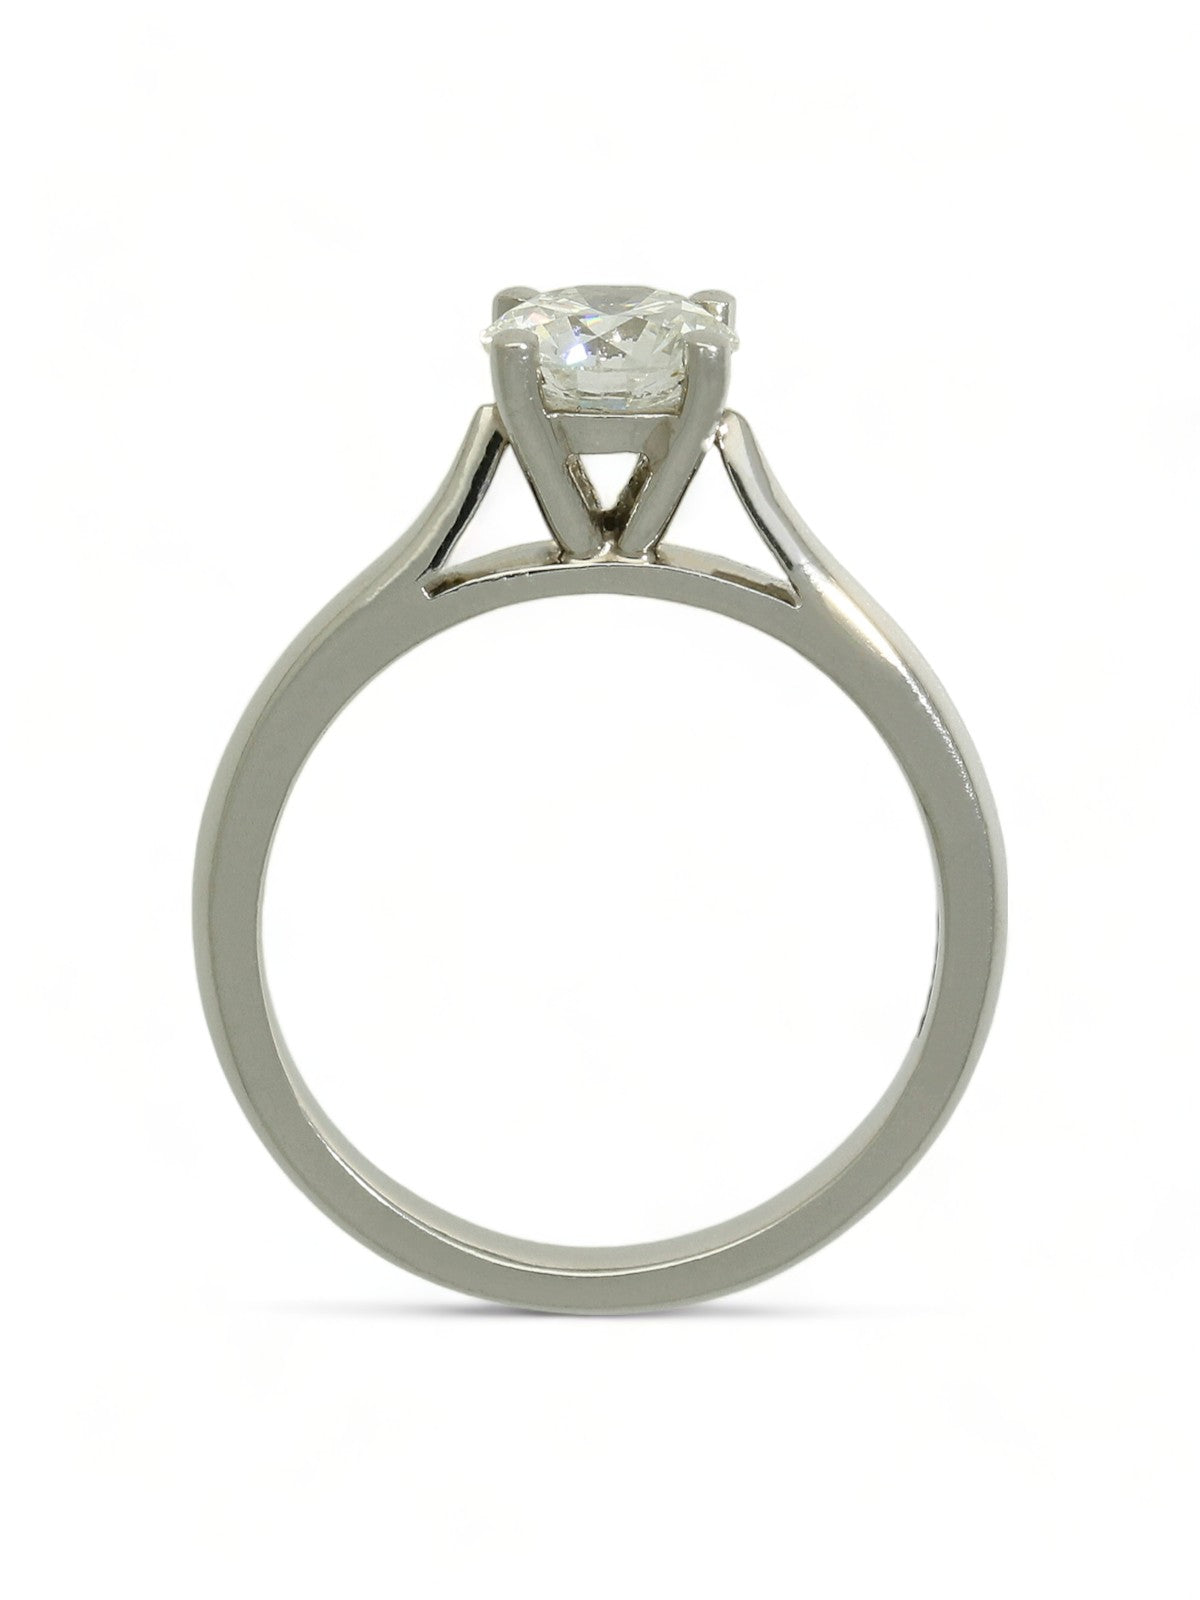 SALE Diamond Solitaire Engagement Ring "The Catherine Collection" Certificated 1.00ct Round Brilliant Cut in Platinum